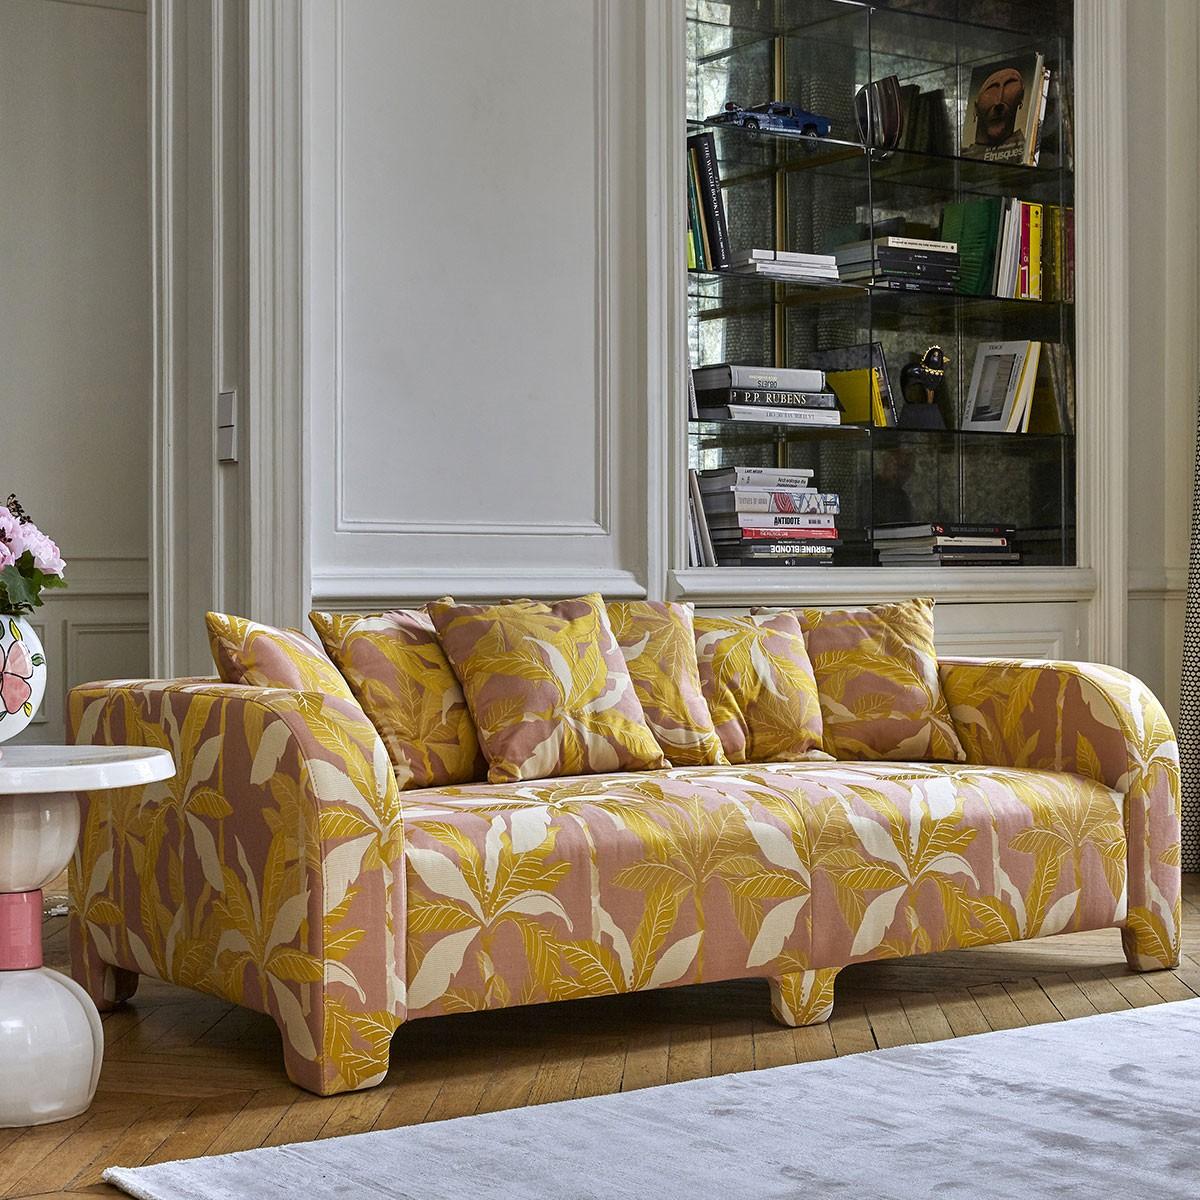 Popus Editions Graziella 4 Seater Sofa in Saffron Antwerp Linen Upholstery

A foot that hides another. A cushion that hides another. A curve that hides another with contemporary lines and a base like a punctuation mark, this sofa gives pride of